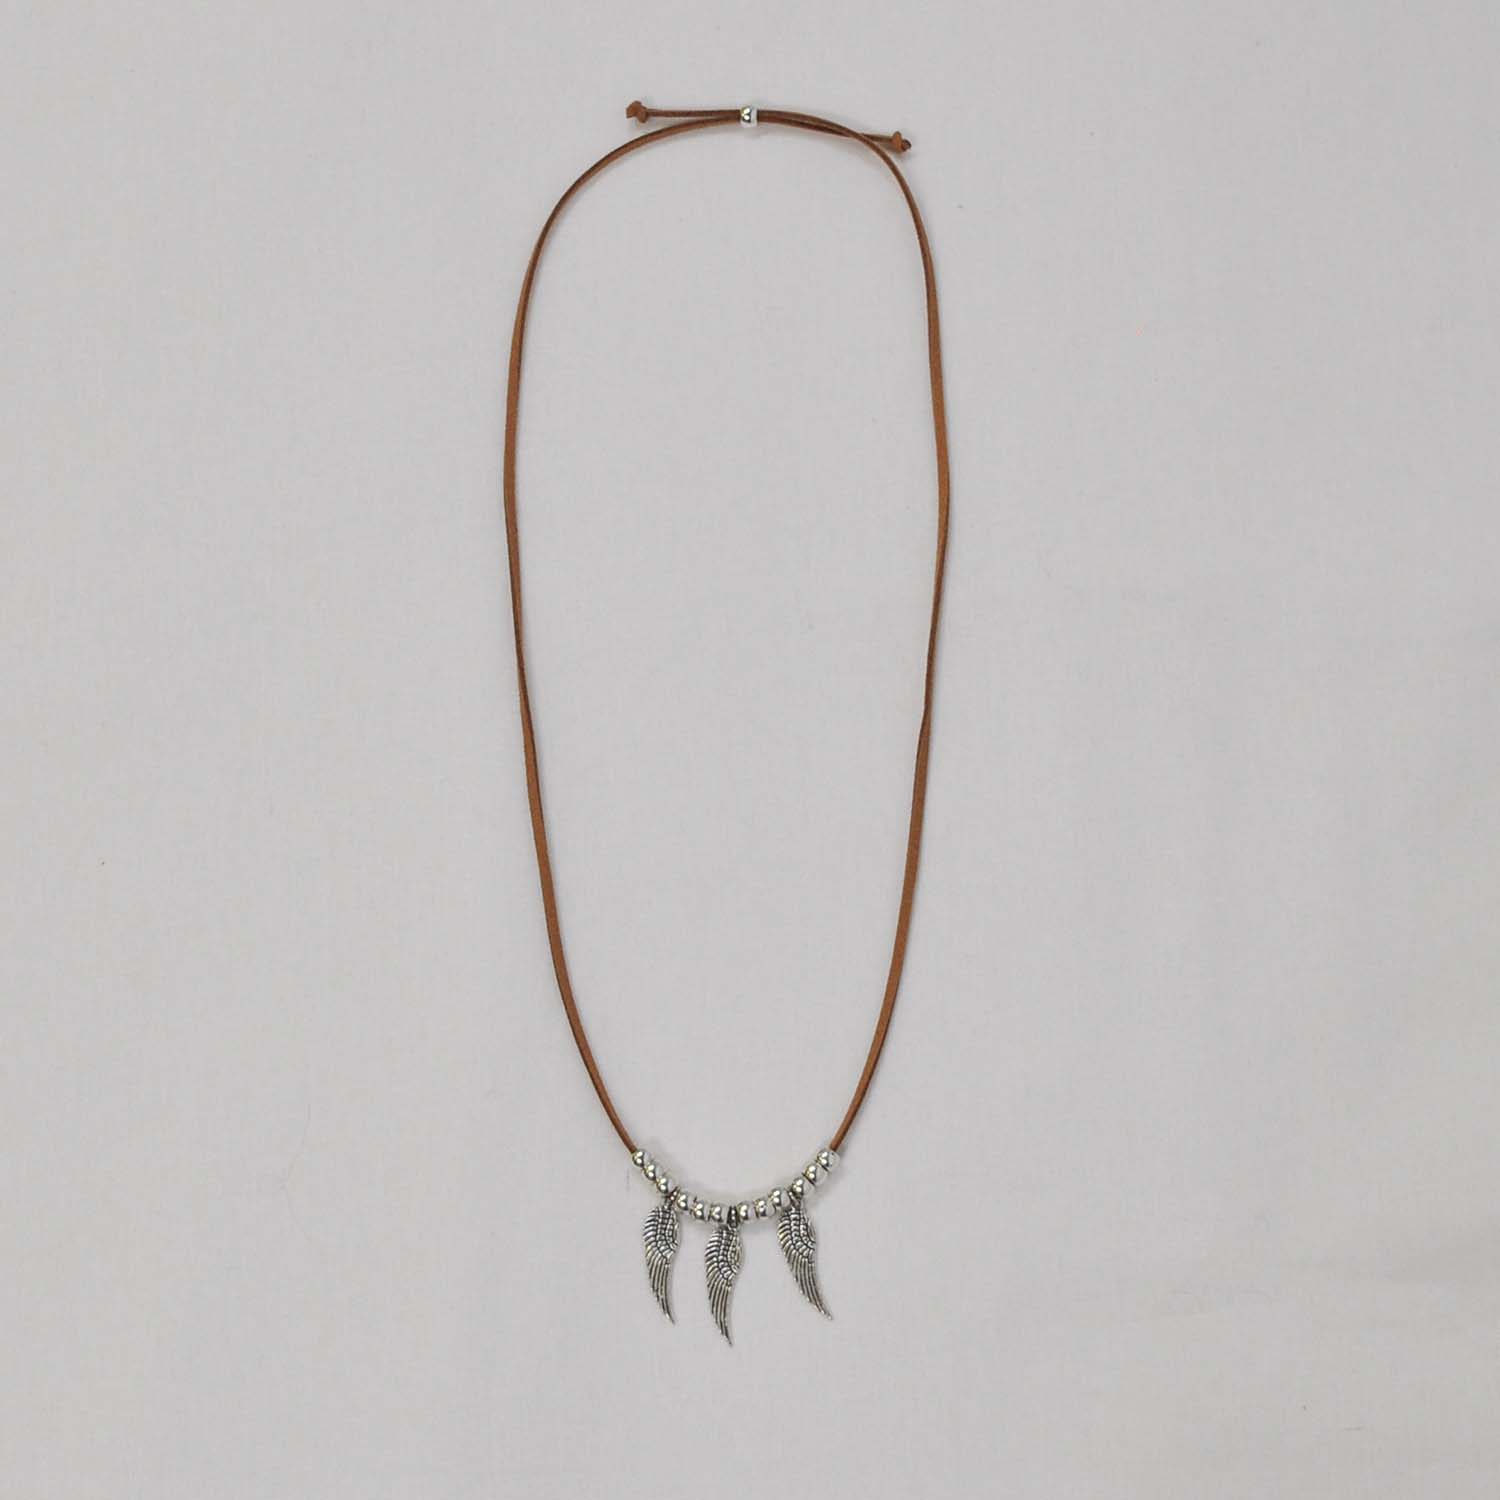 Wings necklace